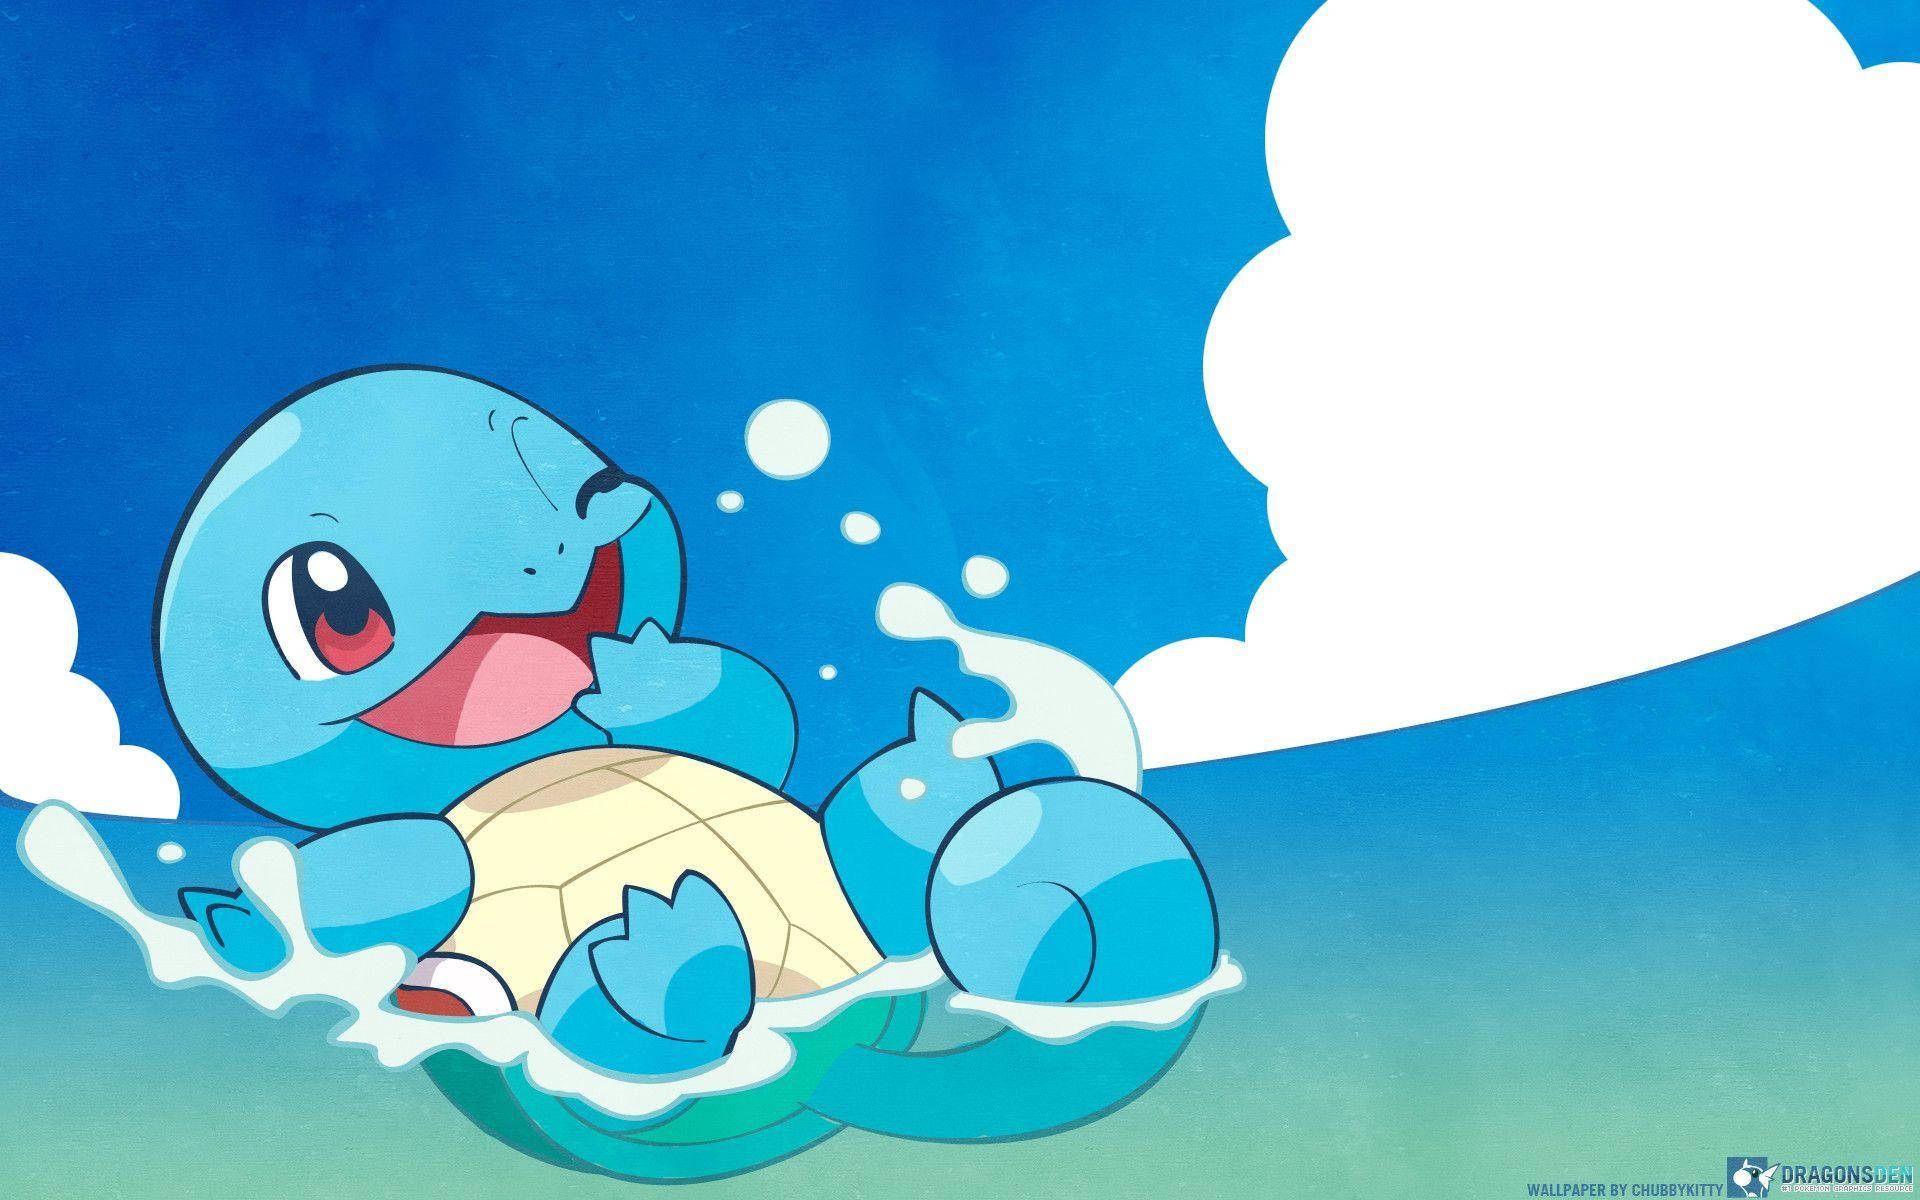 'An Artistic Take on the Iconic Pokemon Squirtle' Wallpaper